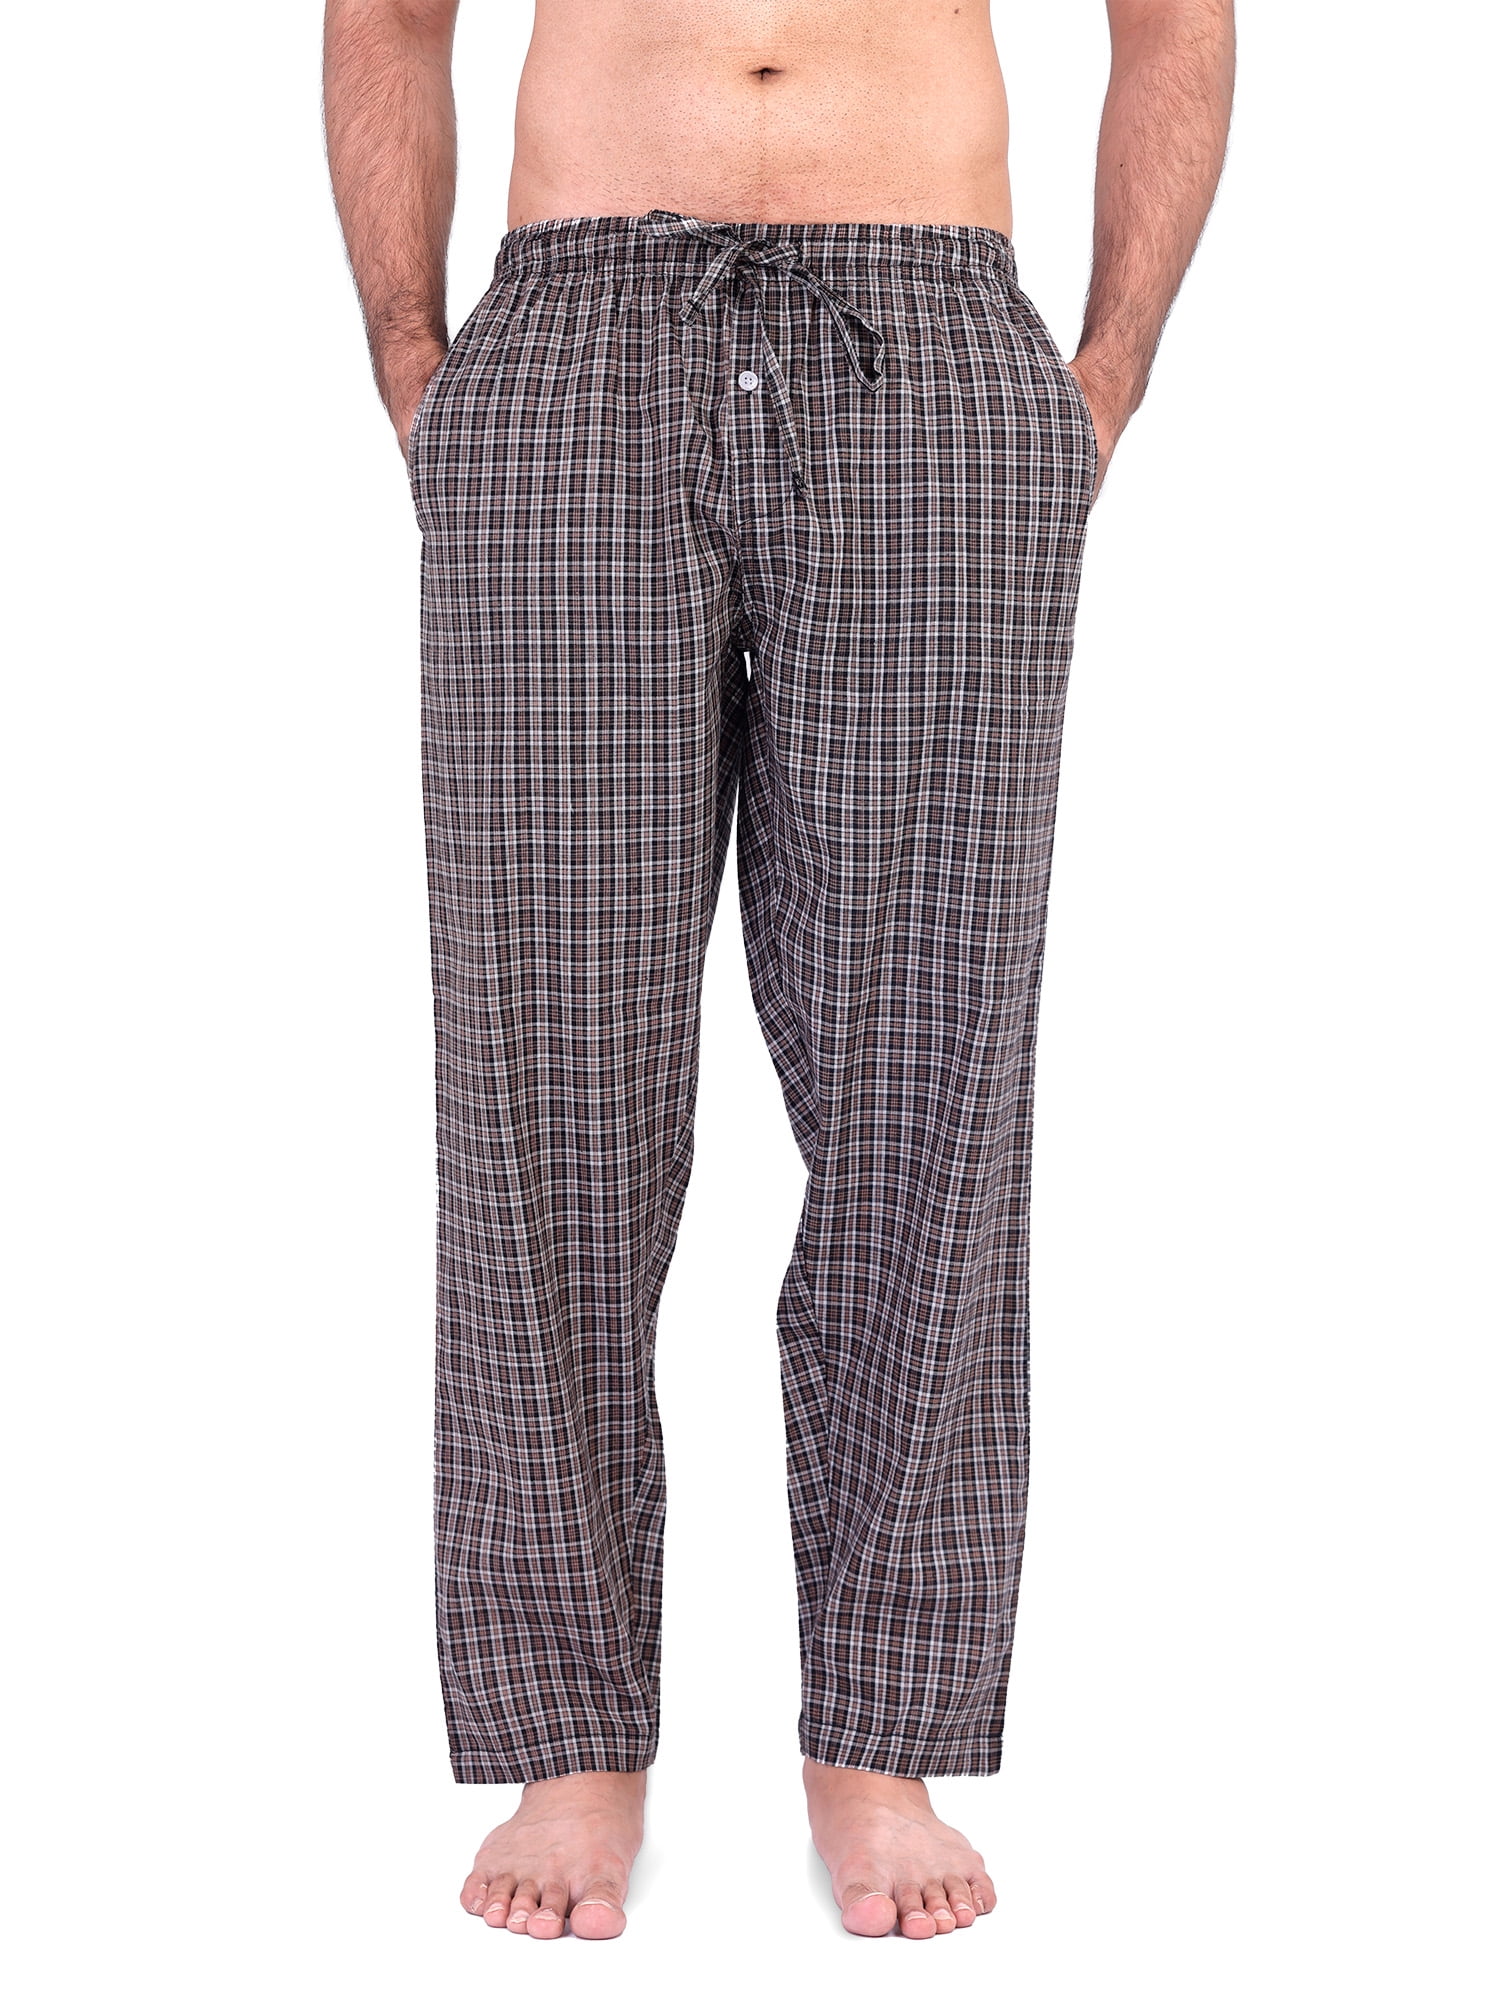 Buy The Cotton Company 100% Cotton Lounge Pant Pyjamas for Men - Cycle  Print (Sky Blue, Medium) at Amazon.in